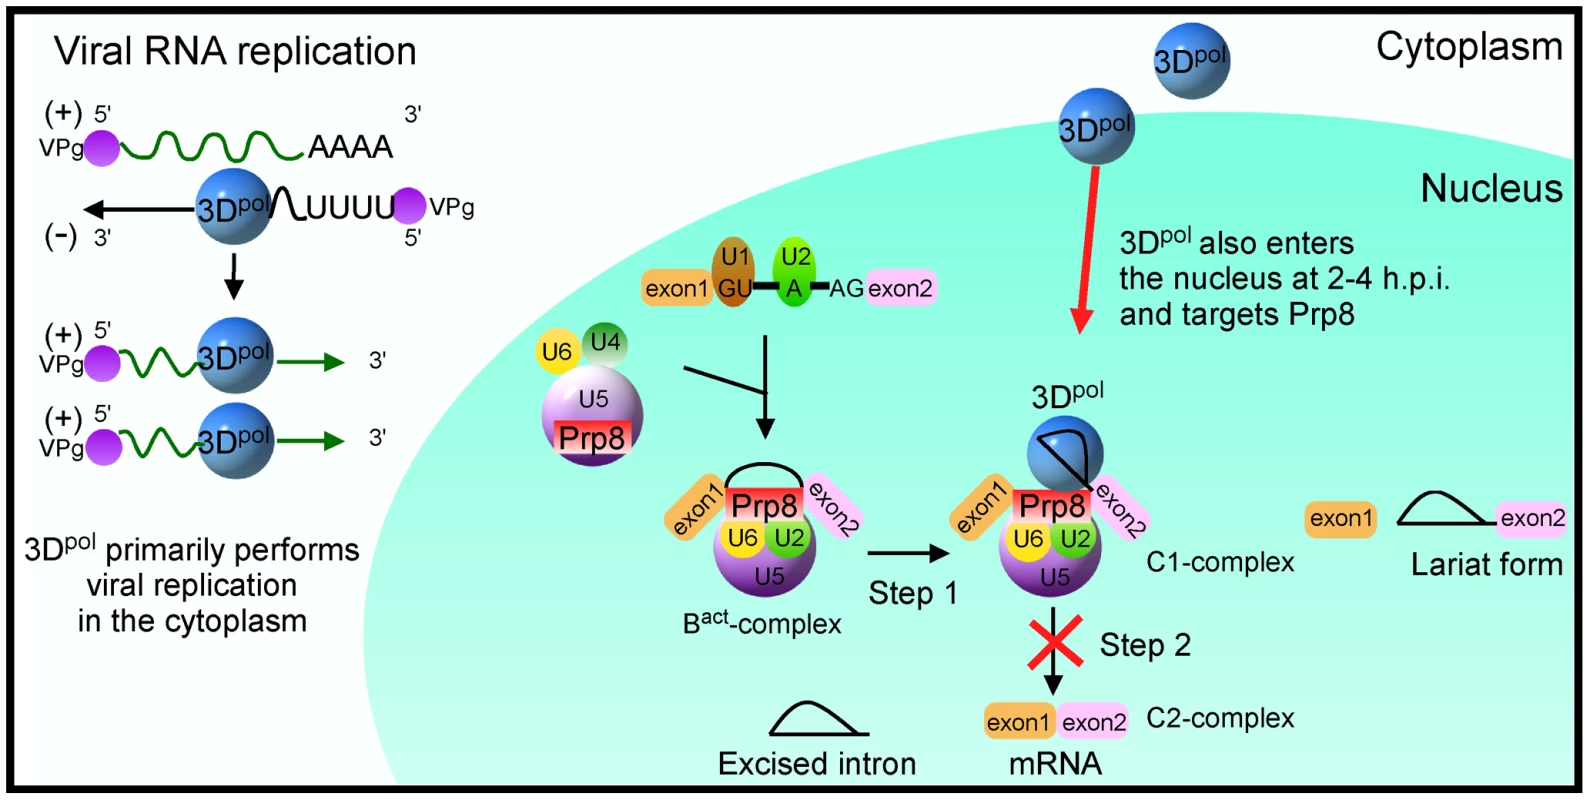 Schematic model of 3D<sup>pol</sup>-mediated inhibition of the cellular splicing by targeting Prp8 in the nucleus.